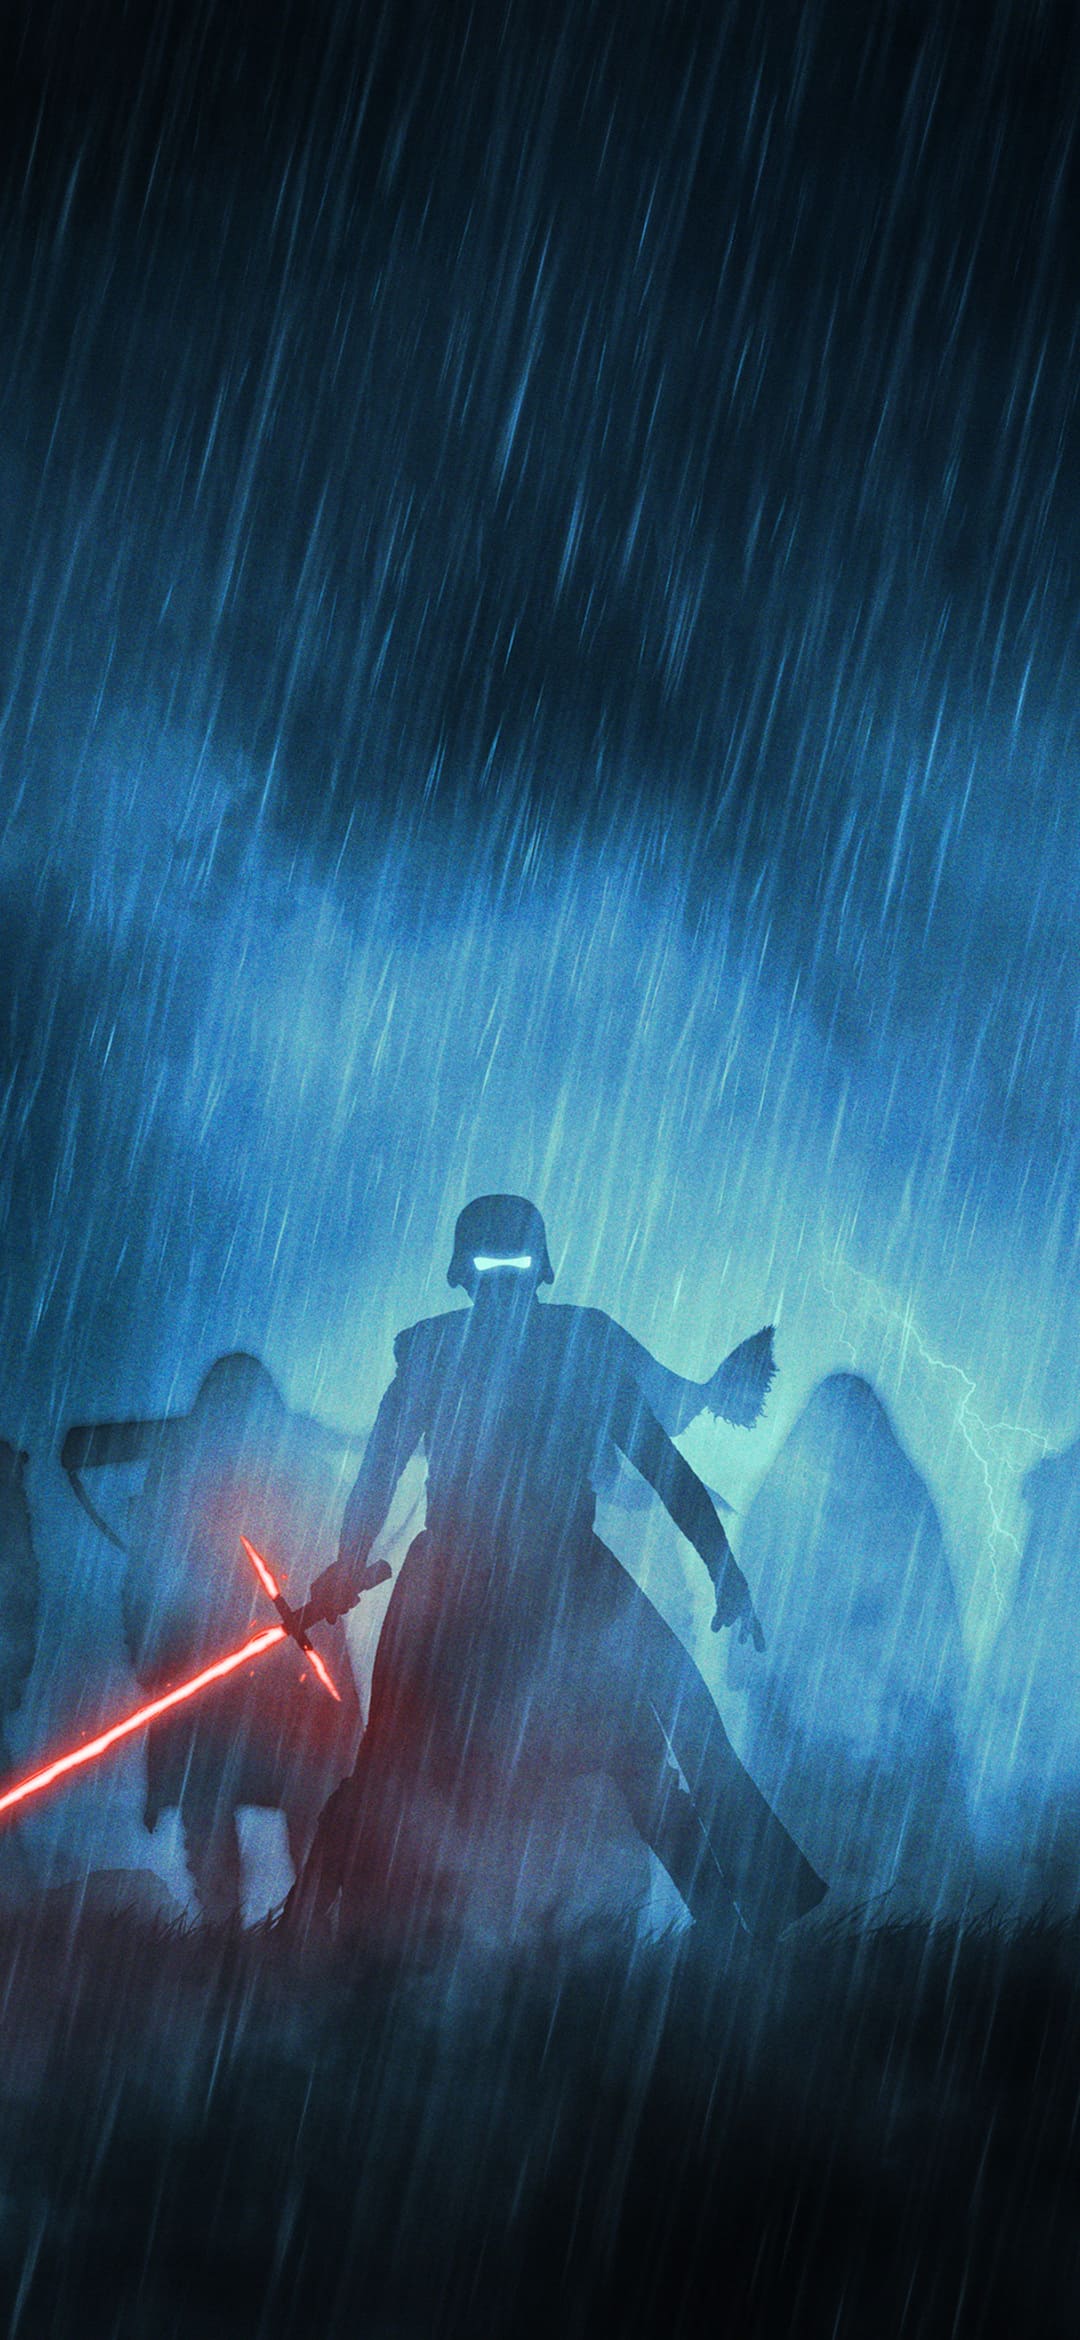 Star Wars wallpaper Ive been using for a while  9GAG